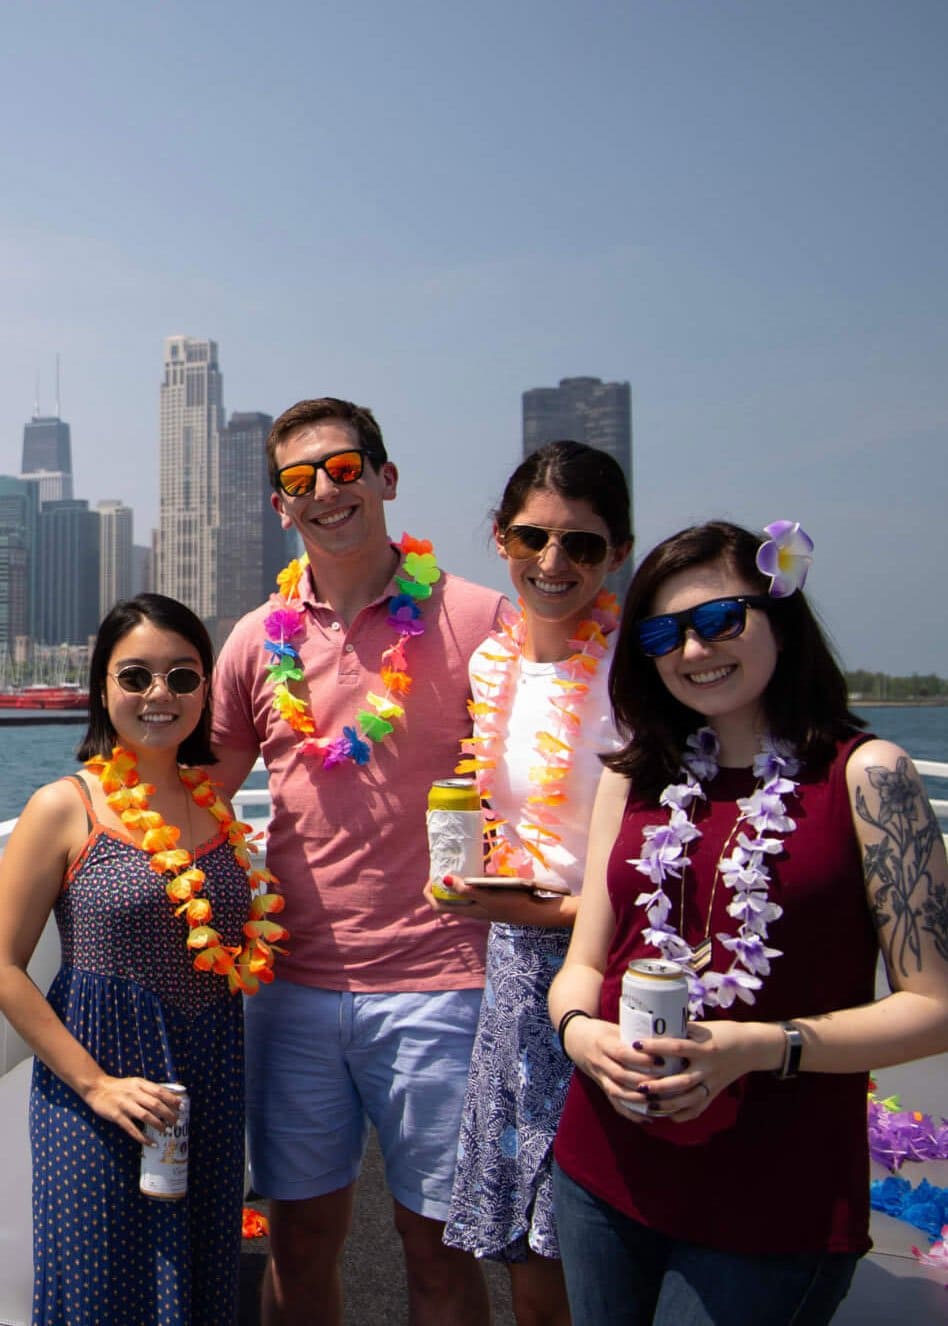 P/E team members enjoy a summer event on a boat on Lake Michigan with the Chicago skyline behind them.